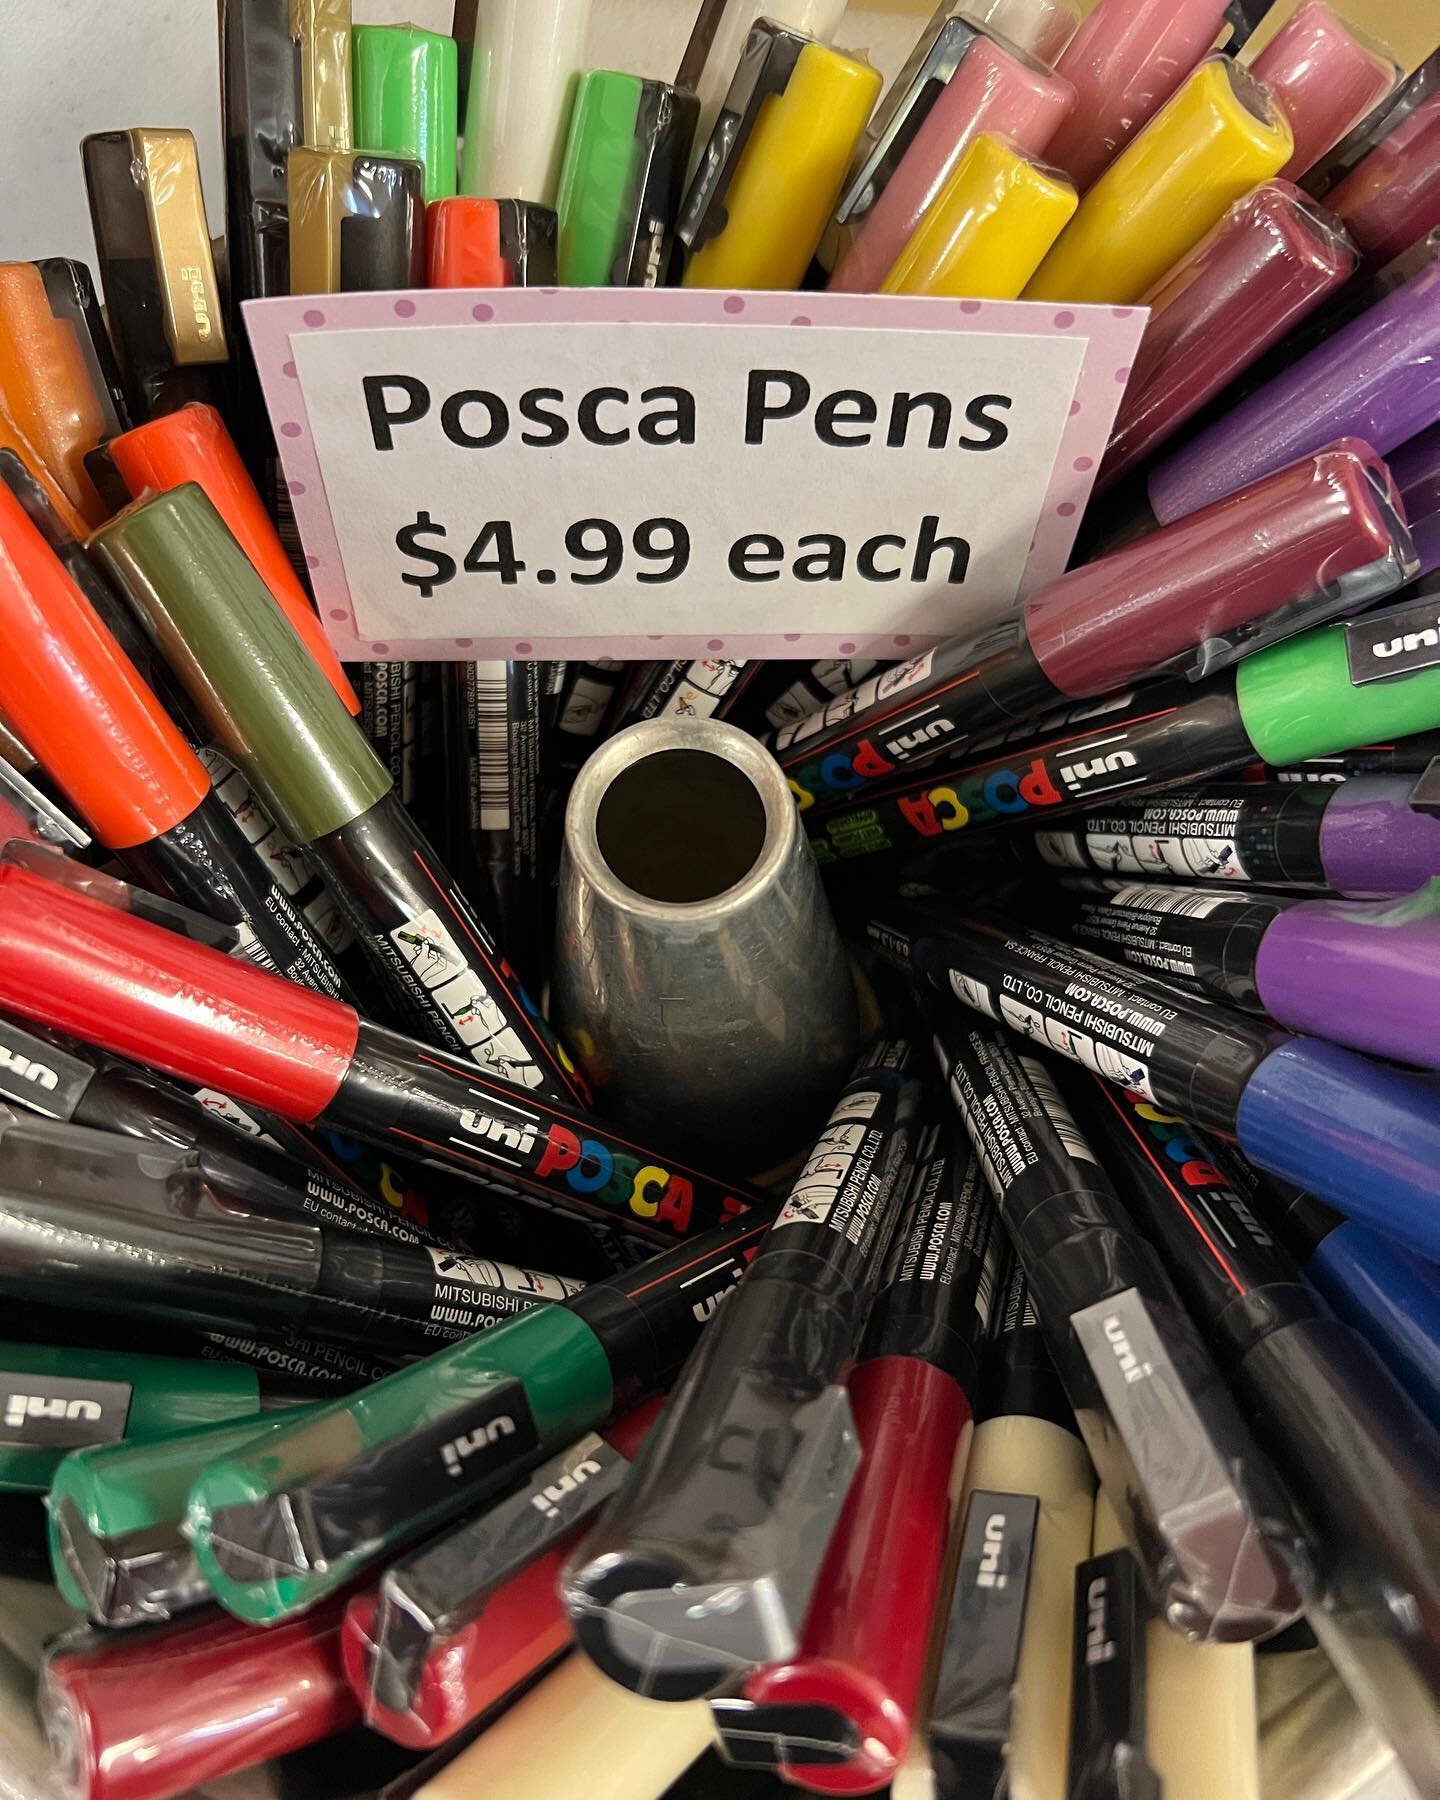 Everyone loves Posca pens and we have them in stock. Grab a few colors today! #posca #paperandimarshall